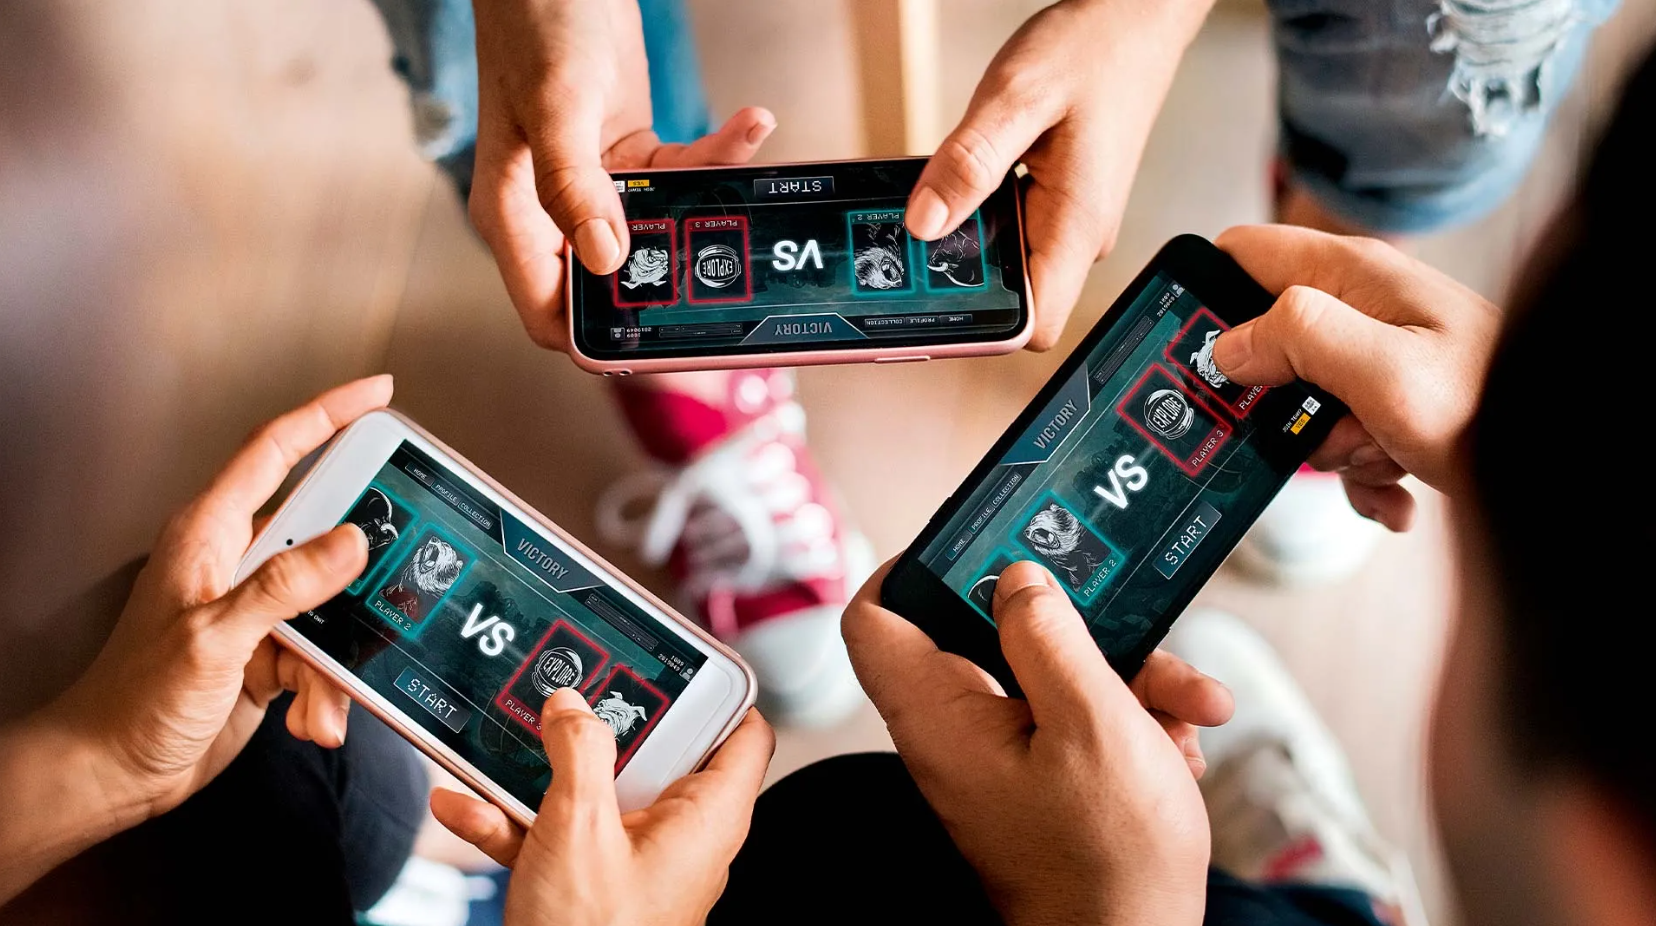 The World of Mobile Gaming New Technologies Shaping the Experience